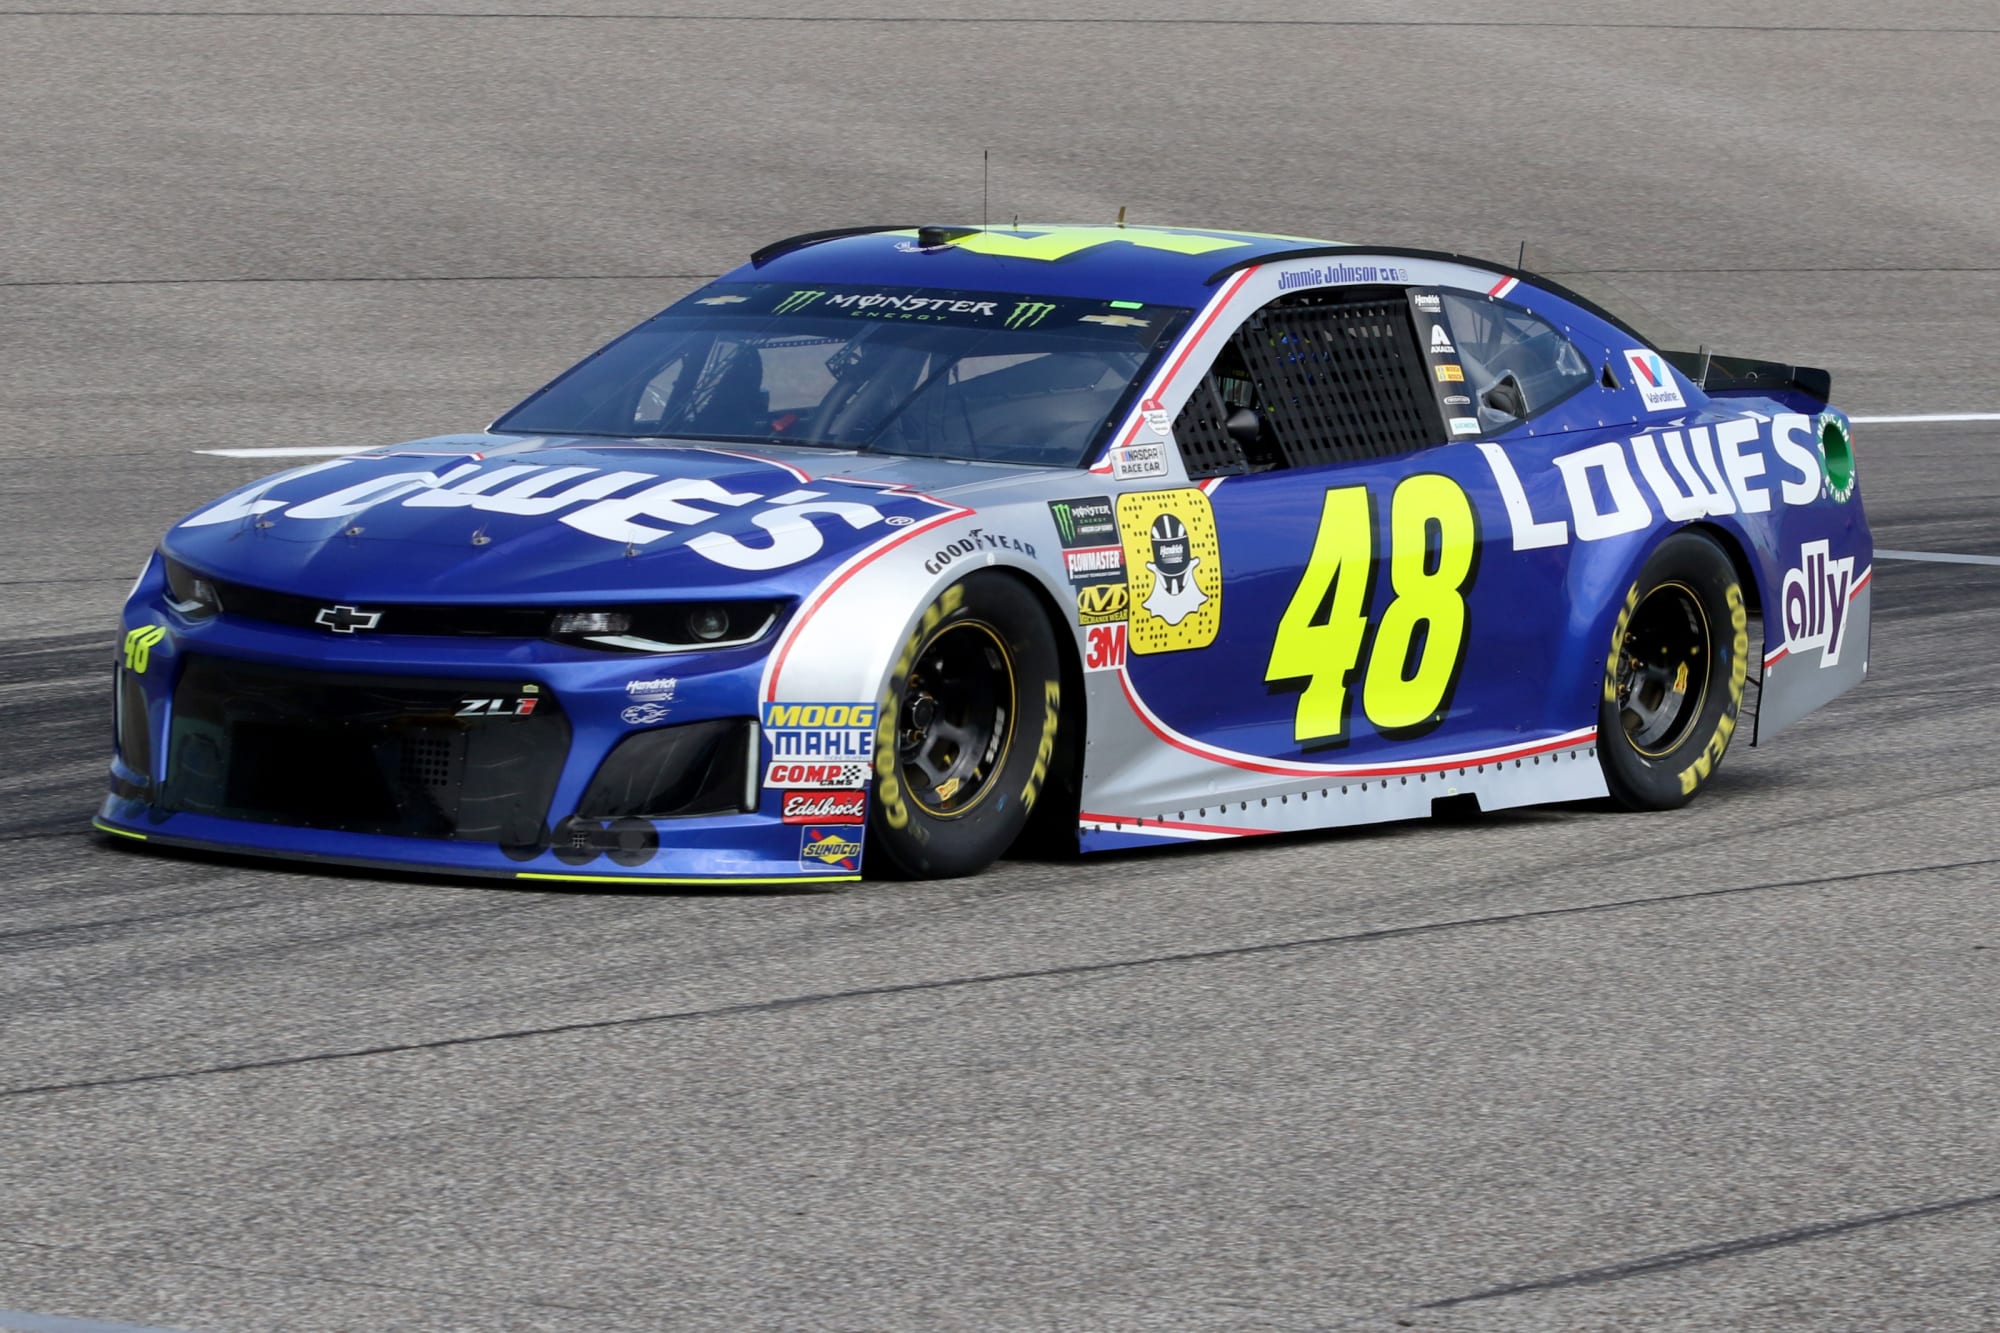 Check Out New Sponsor And 2019 Paint Scheme For Jimmie Johnson